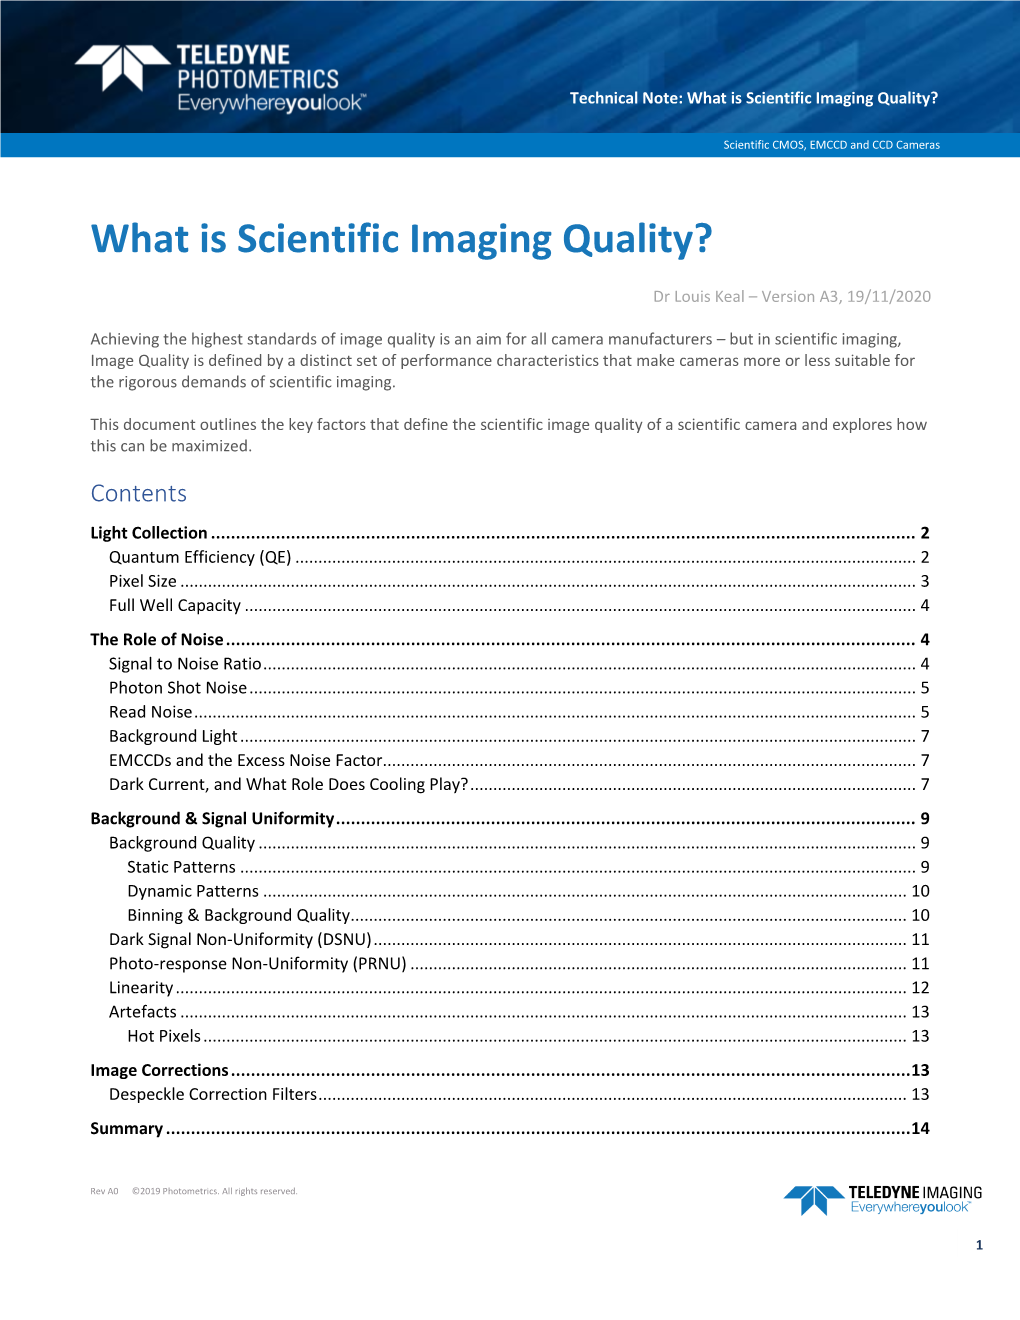 What Is Scientific Imaging Quality?